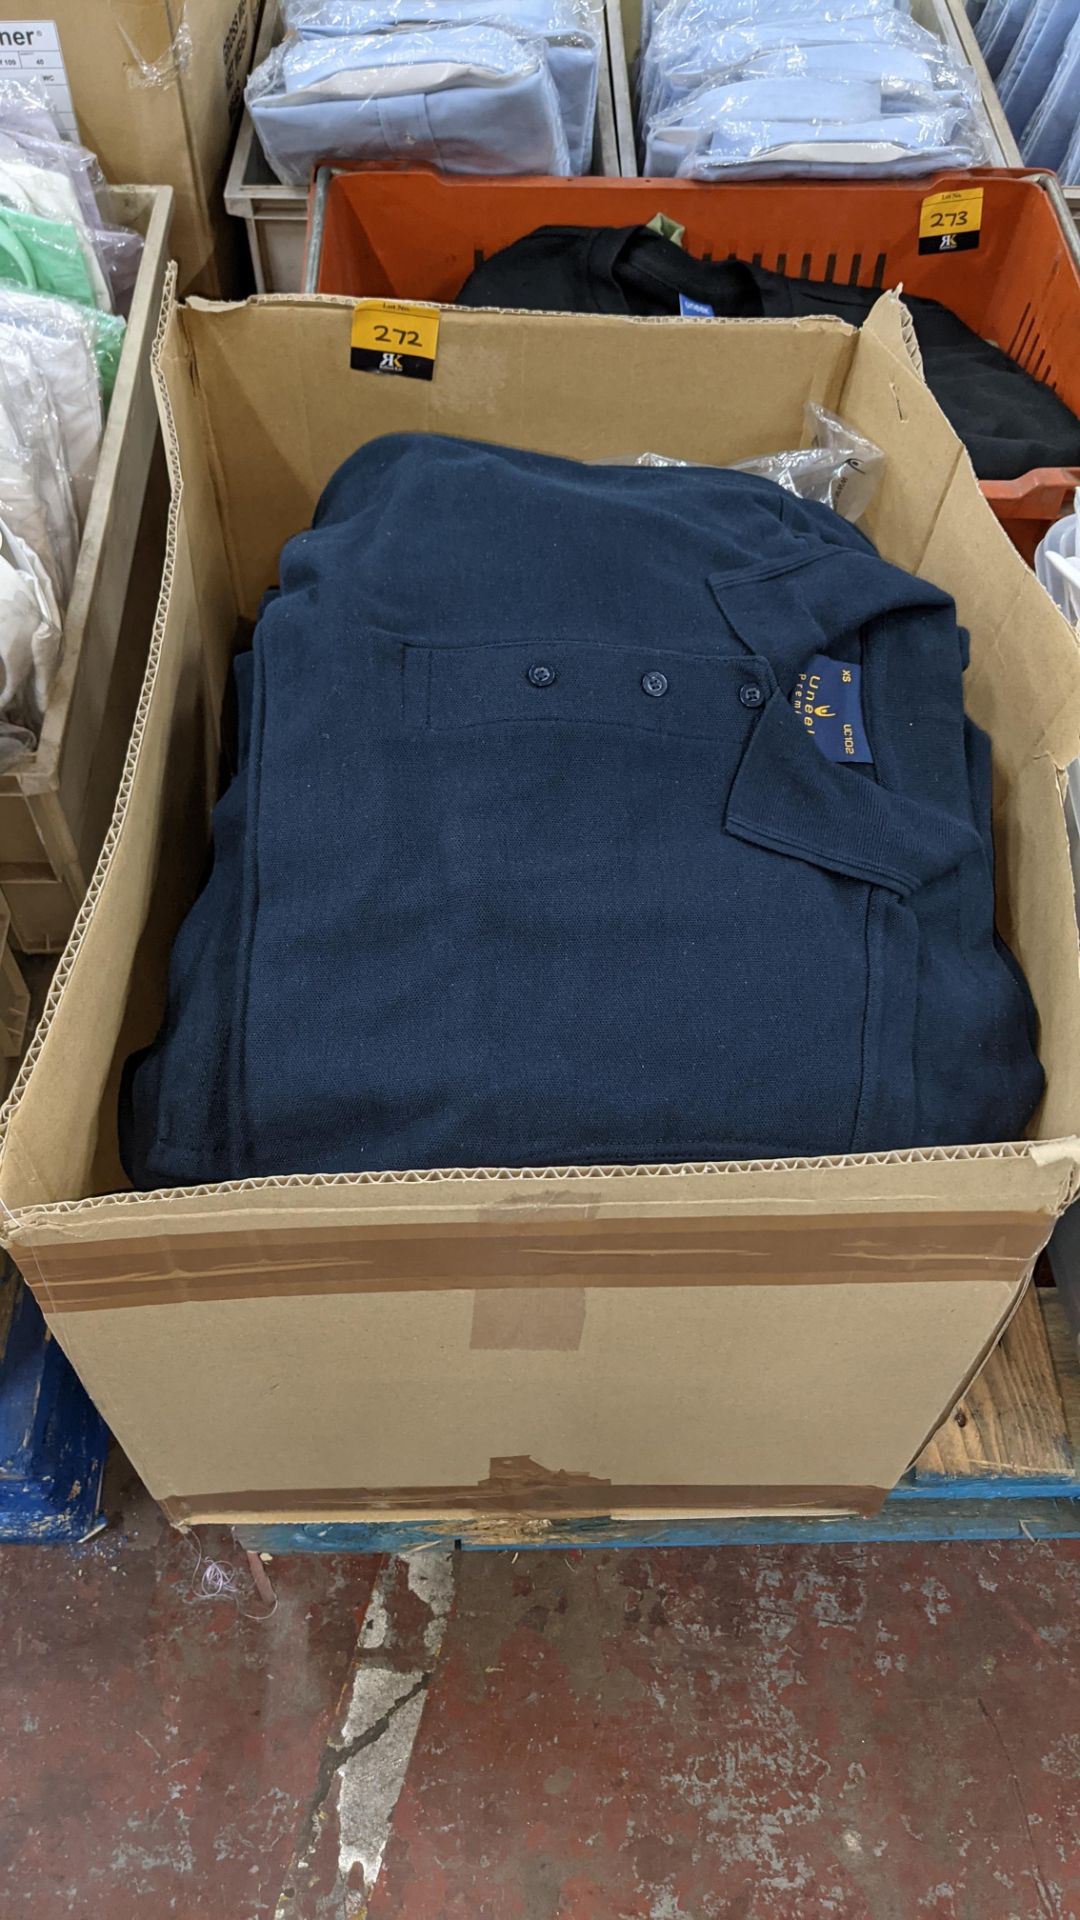 Quantity of Uneek blue polo shirts - the contents of 1 large box